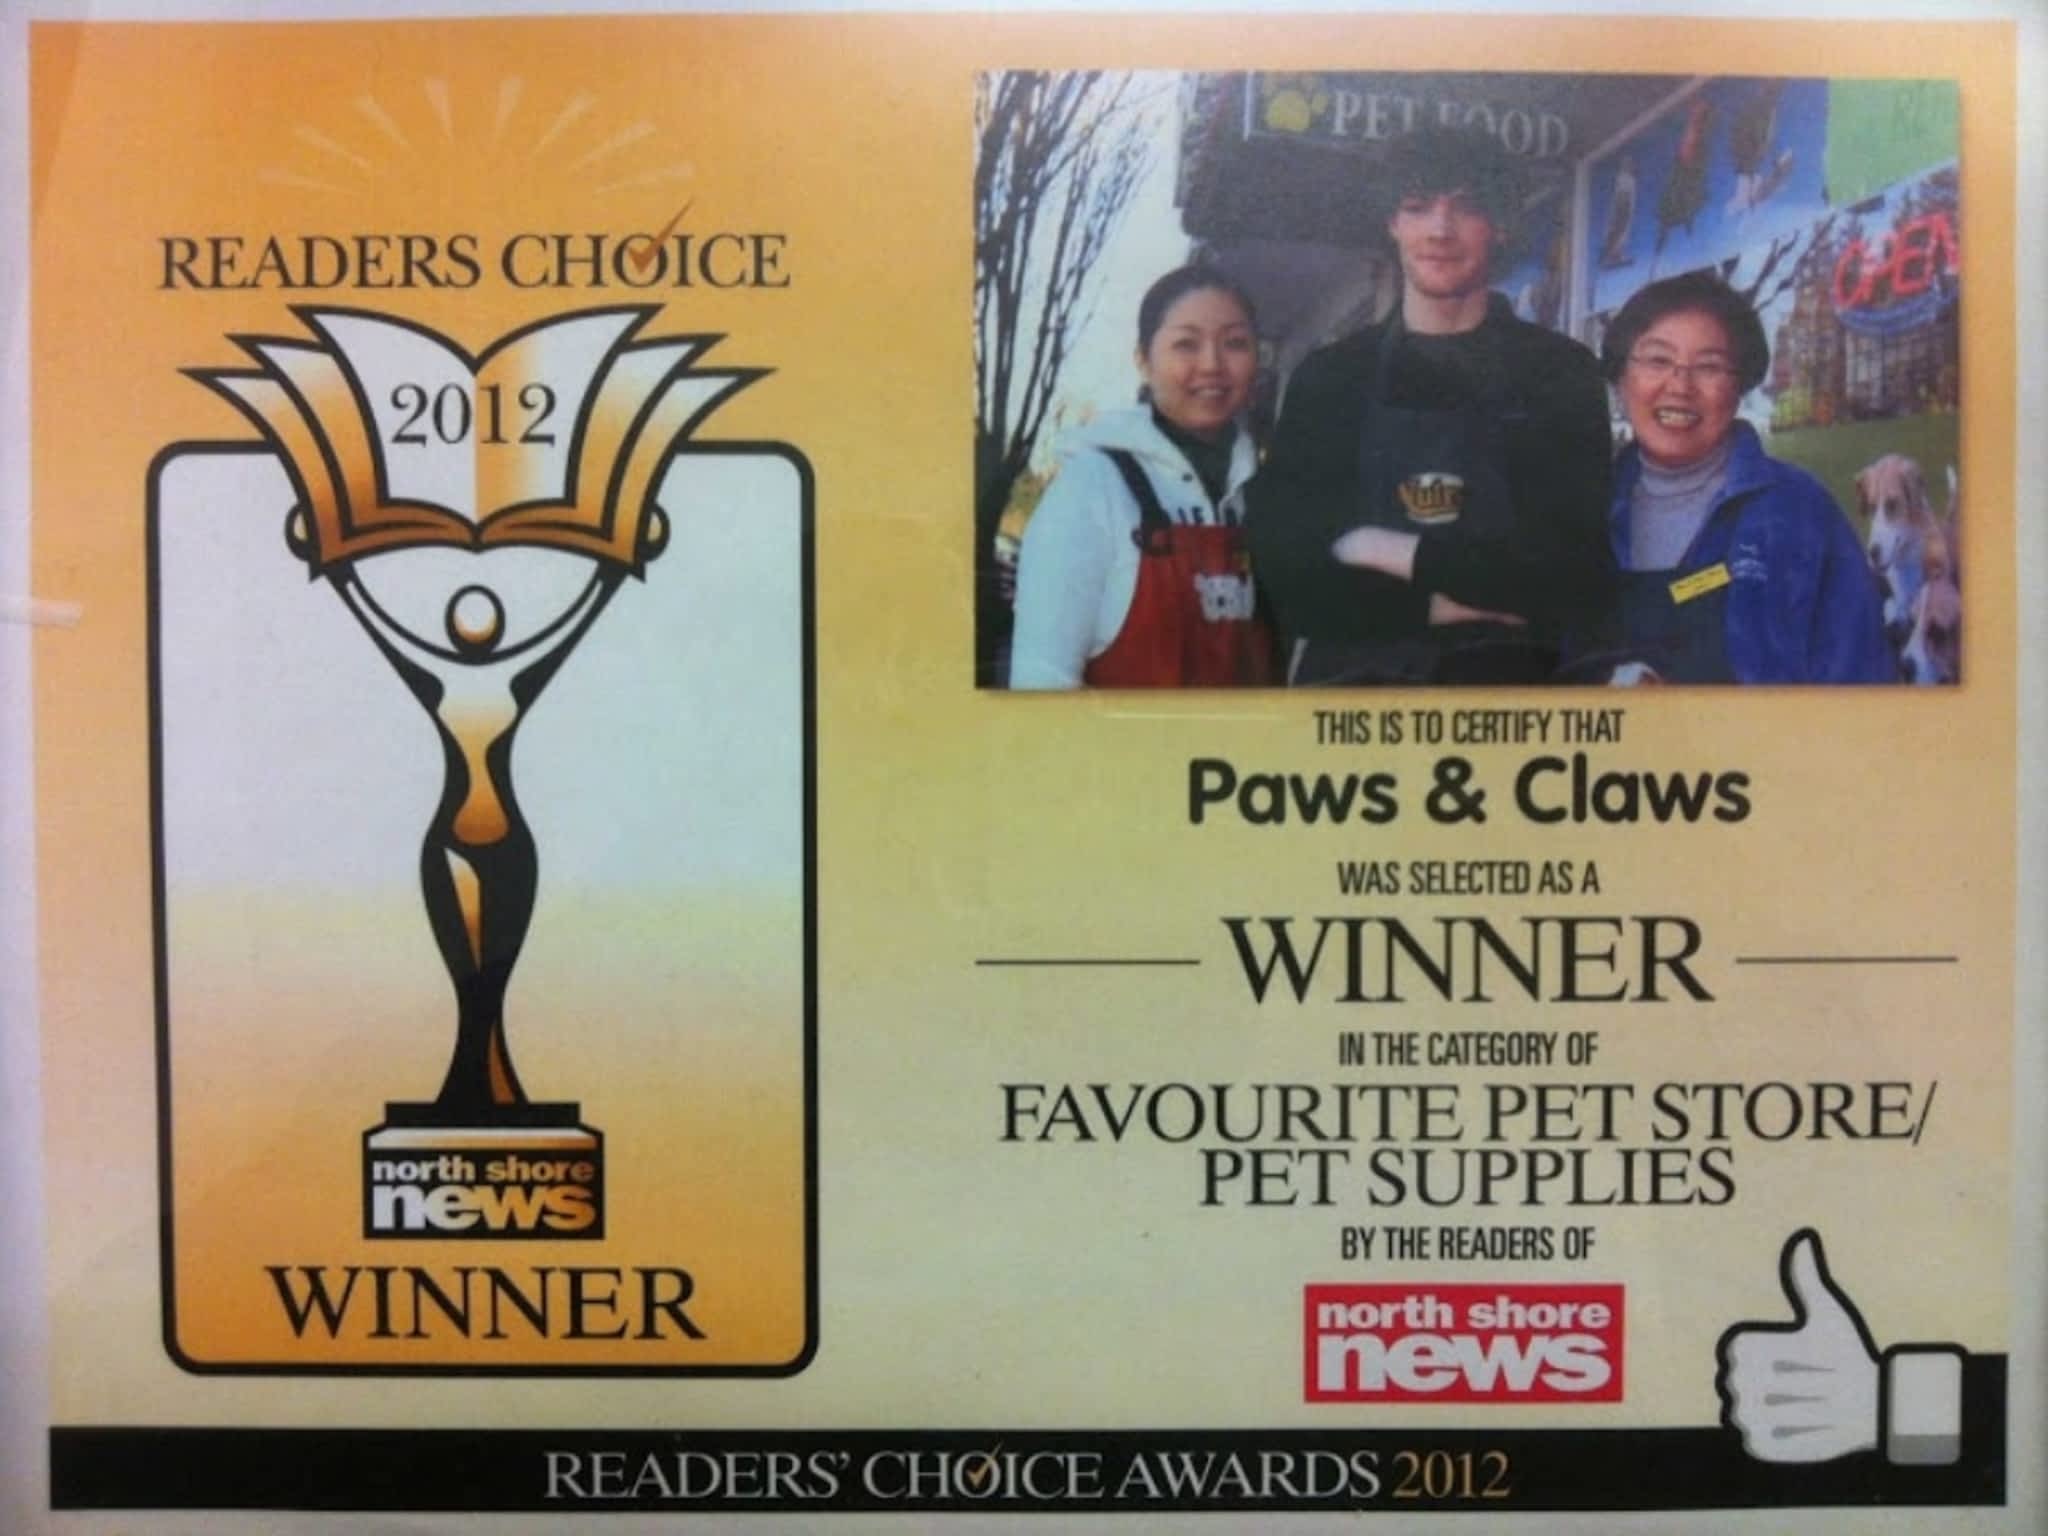 photo Paws & Claws Pantry